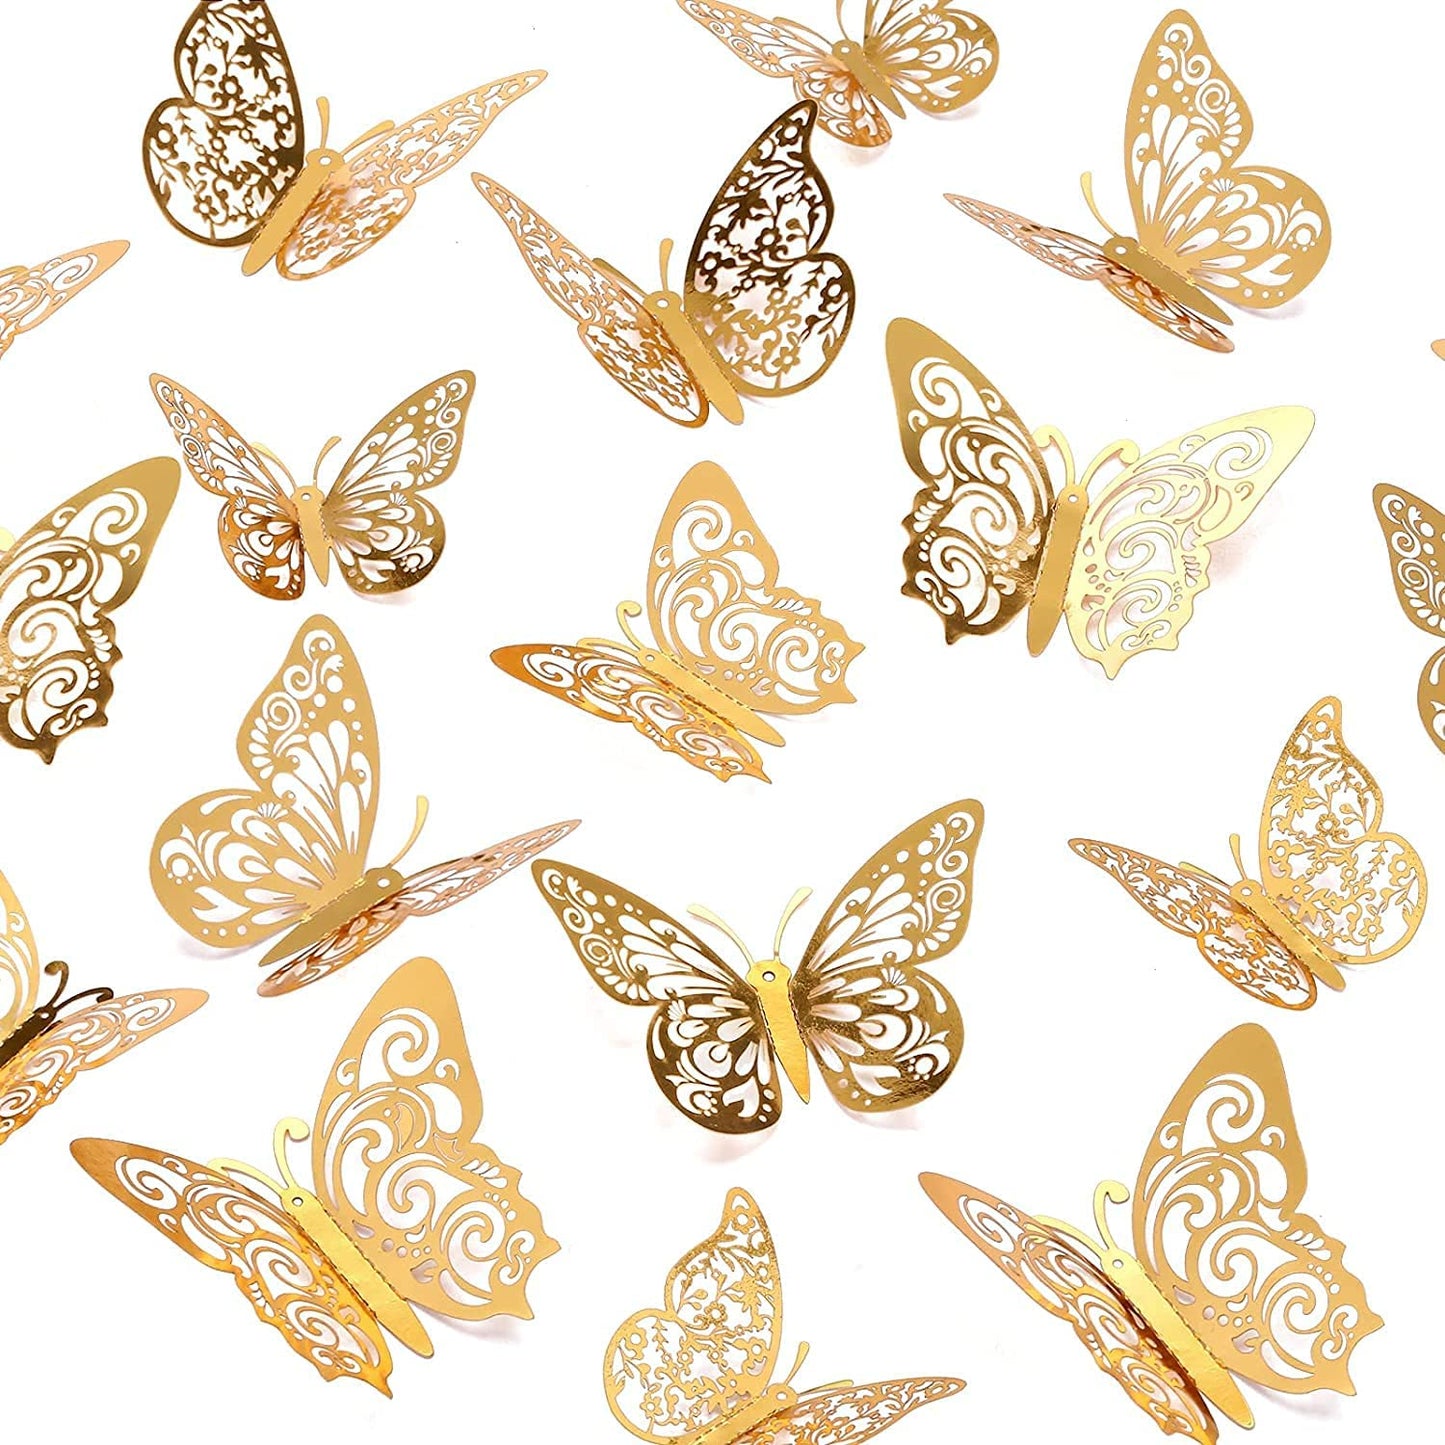 72 Pcs Gold Butterfly Decorations, 3 Sizes 4 Styles, 3D Butterfly Wall Decor, Butterfly Party Decorations, Birthday Decorations, Butterflies for Crafts, Cake Decorating, Wall Stickers Room Decor for Baby Shower Girls Kids